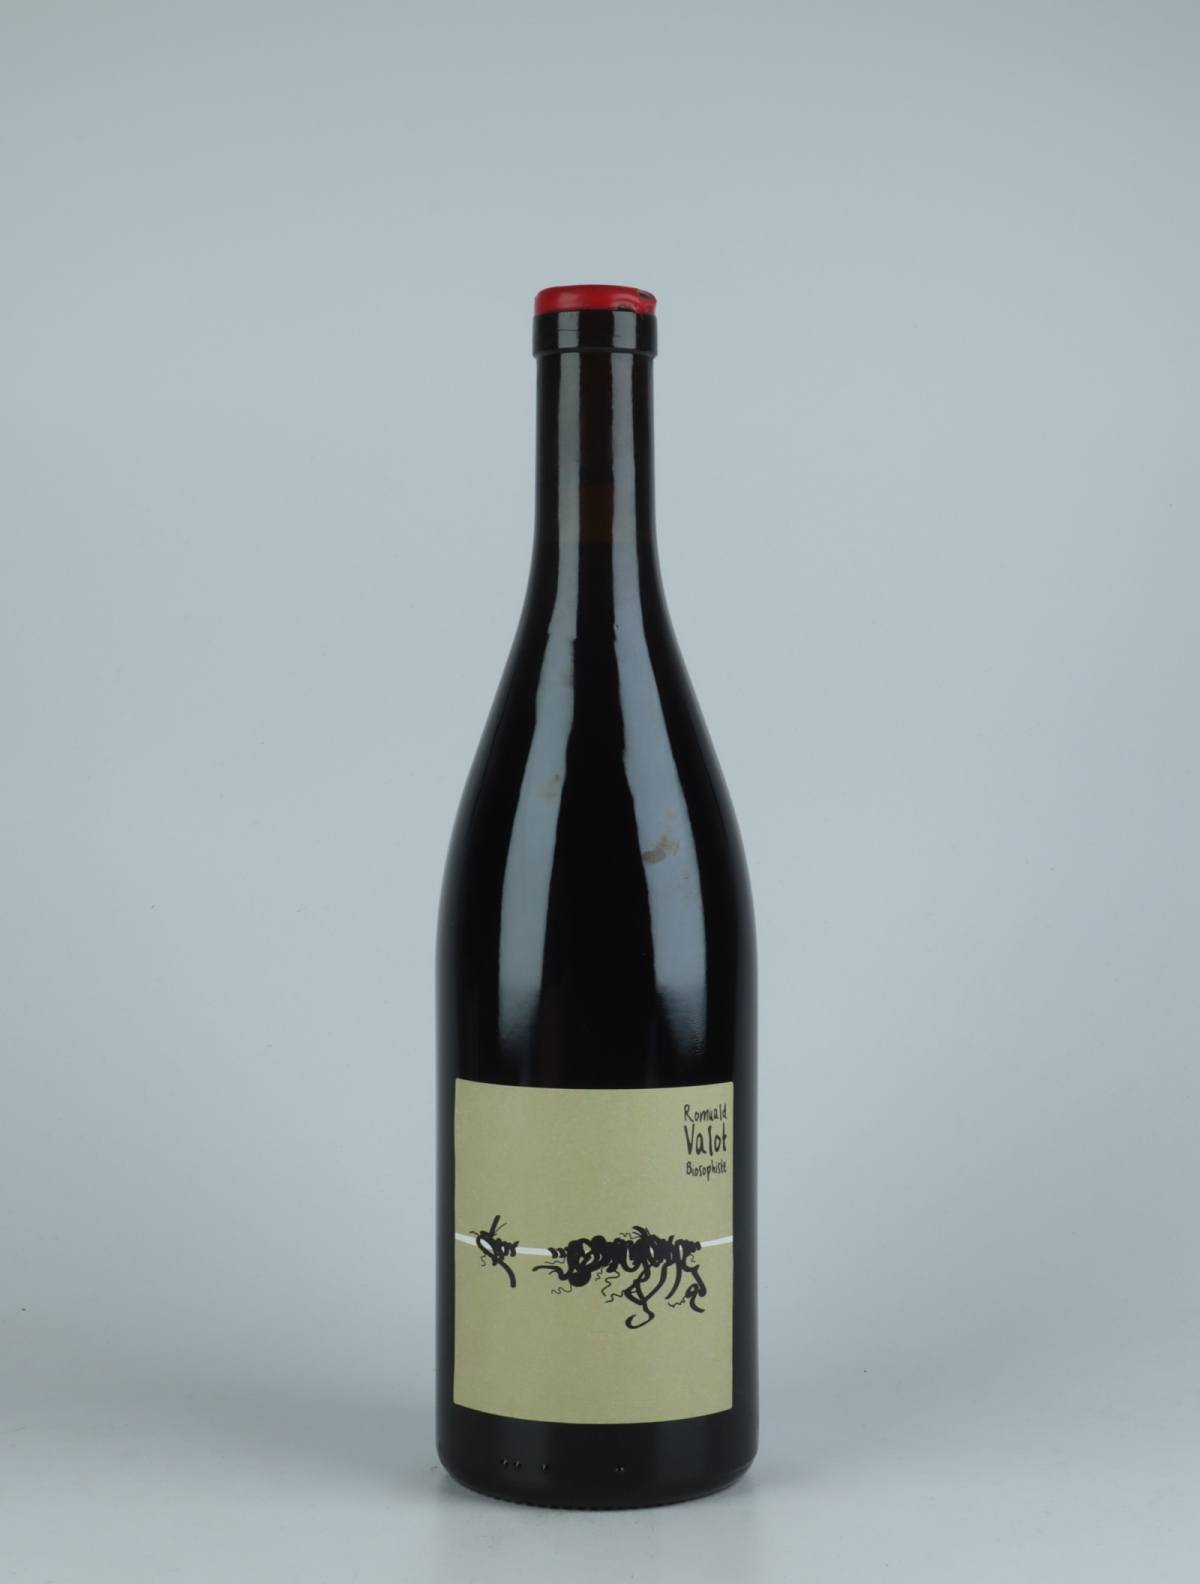 A bottle 2019 Cuvée 21550 - Infusion de Pinot Noir Red wine from Romuald Valot, Beaujolais in France